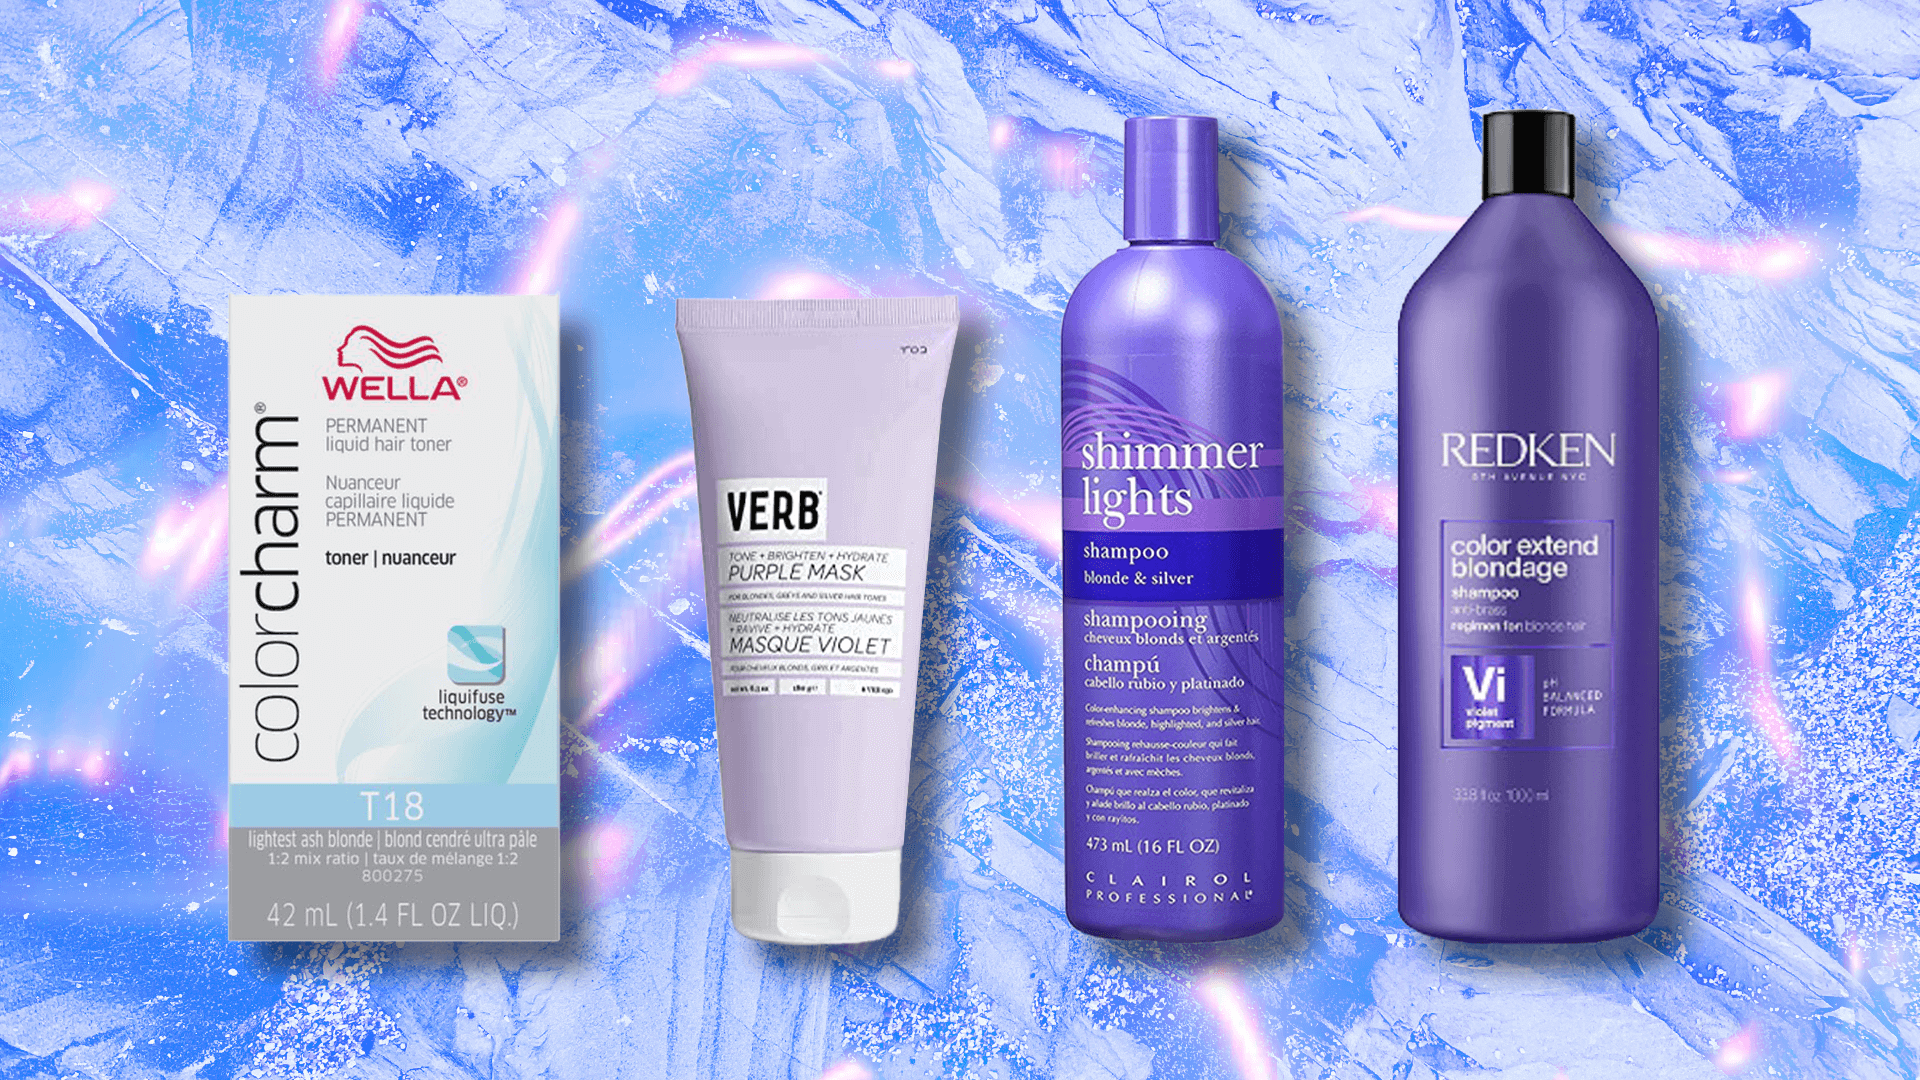 Enig med Mammoth Have en picnic Keep it Cool with These 6 Icy Toners and Toning Shampoos - The Tease